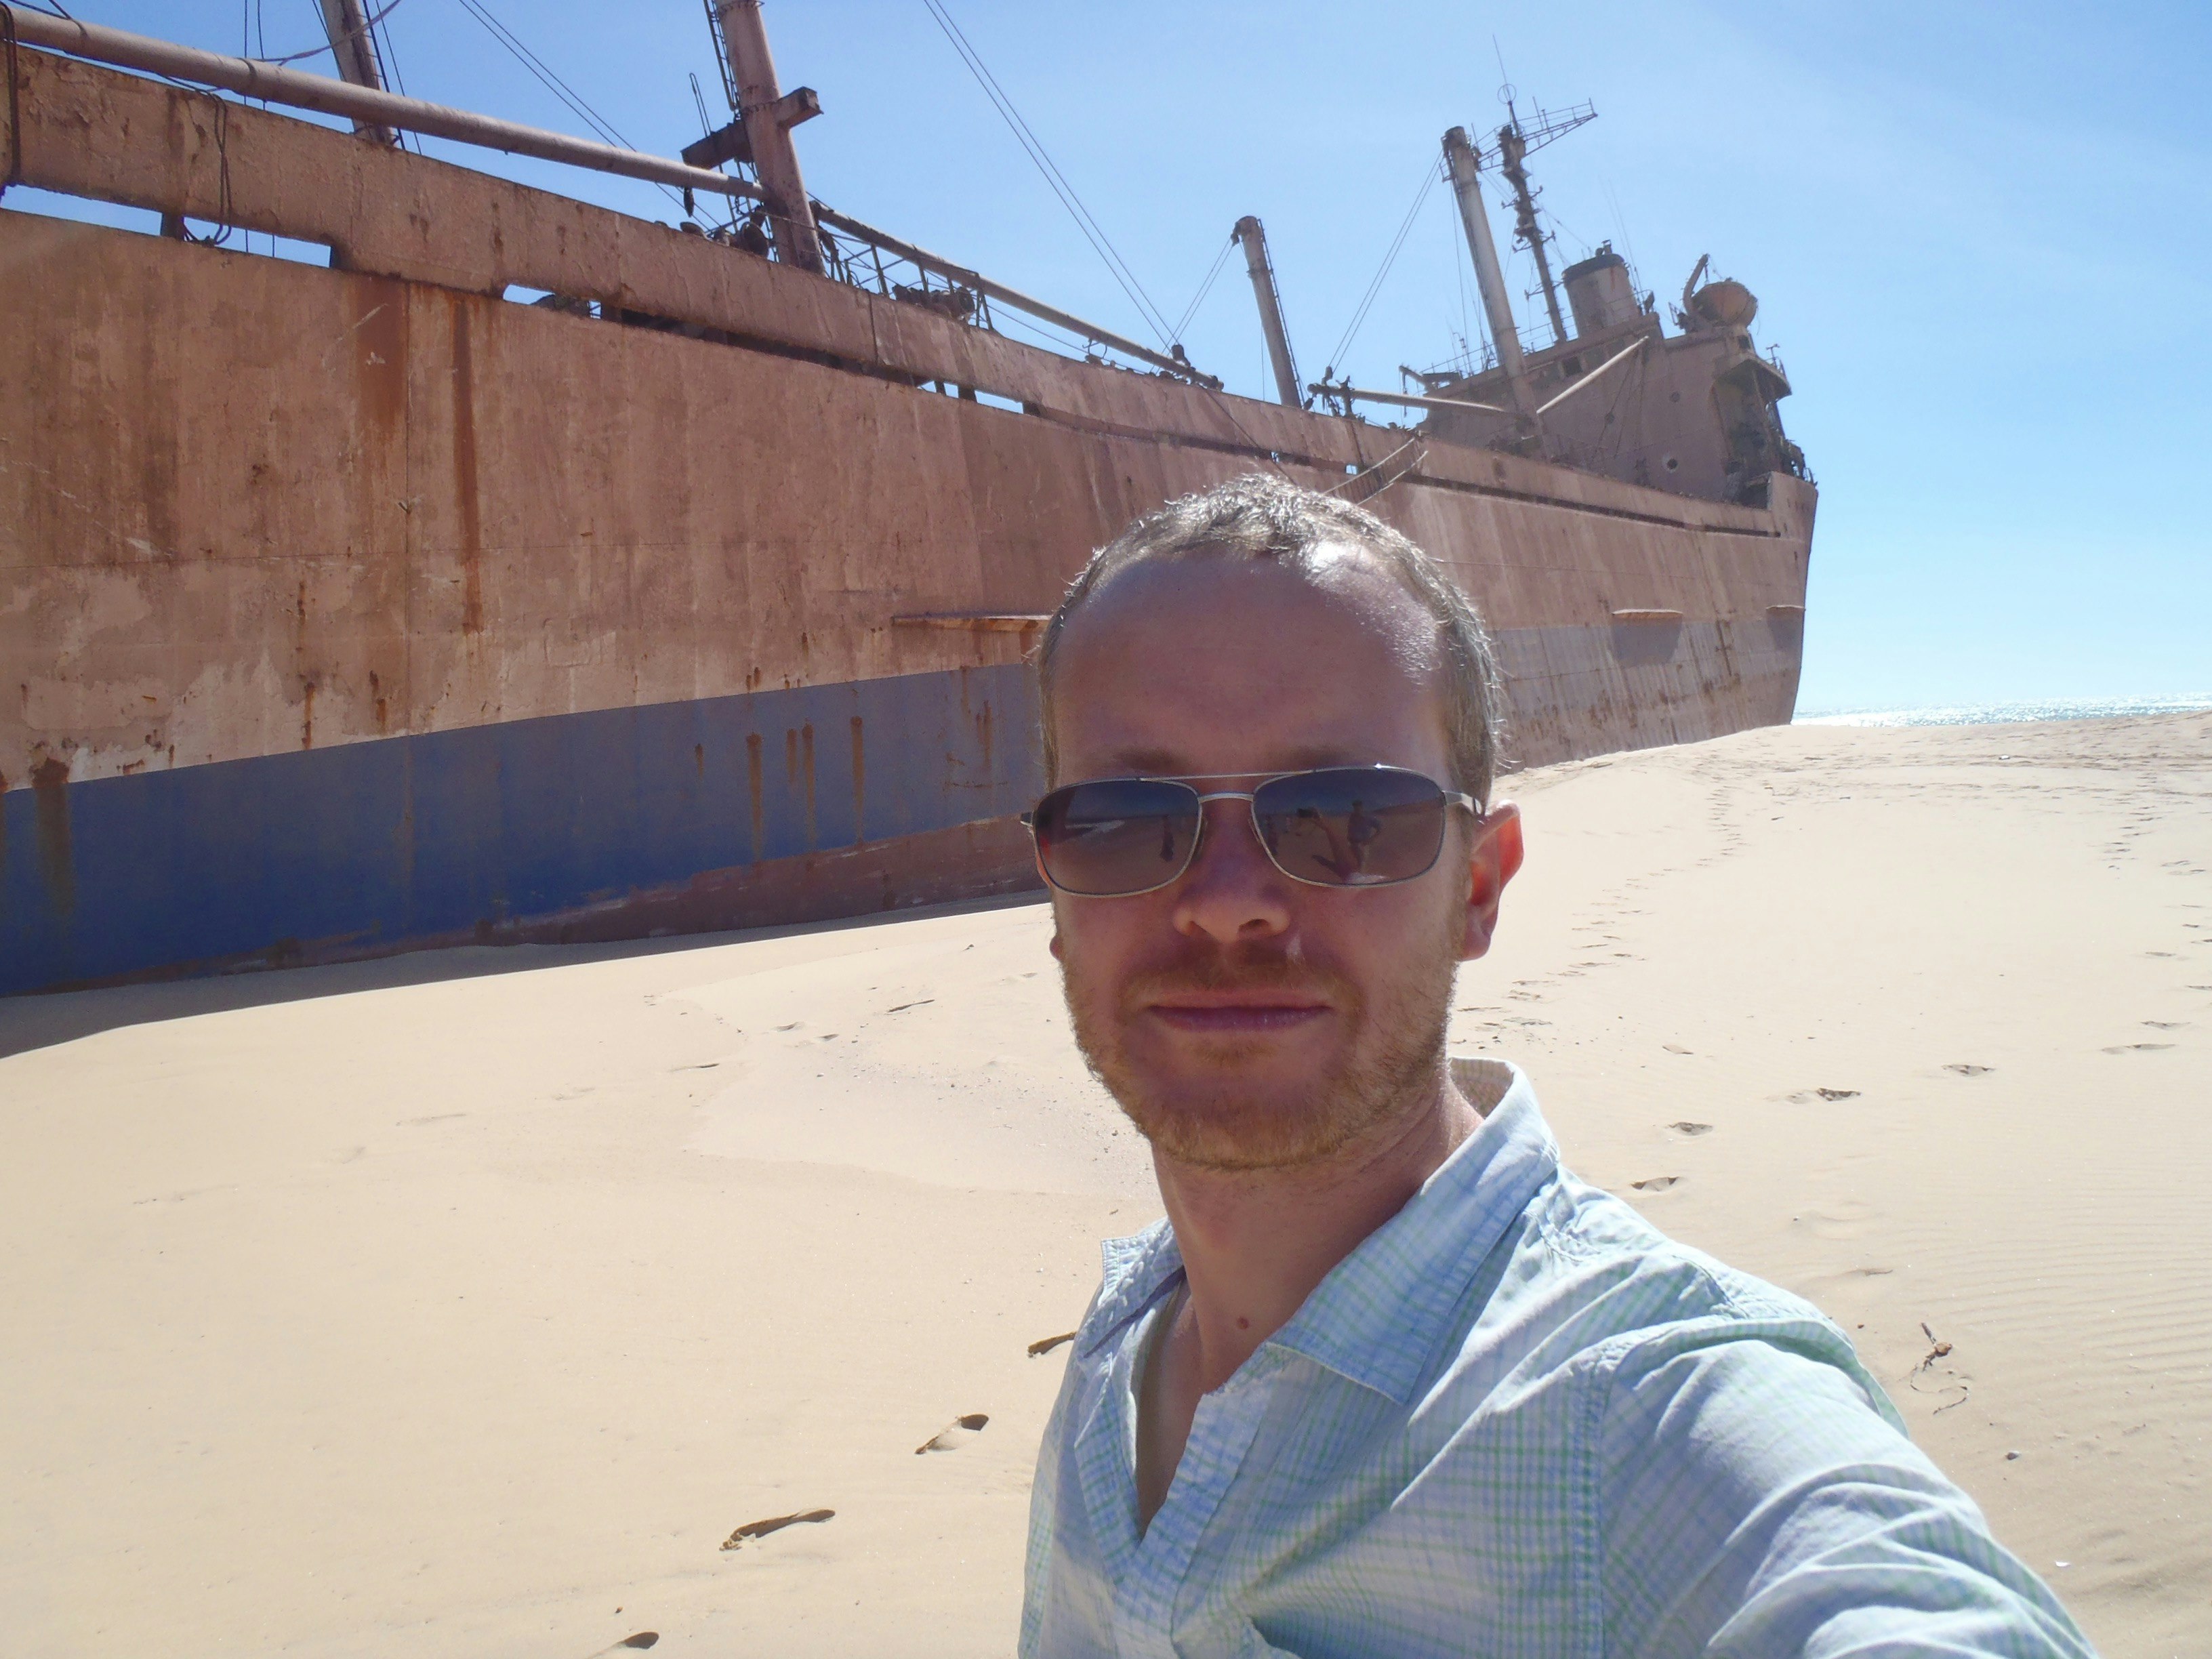 Paul Clammer takes a selfie in front of an enormous shipwreck on a sandy beach in Mauritania.